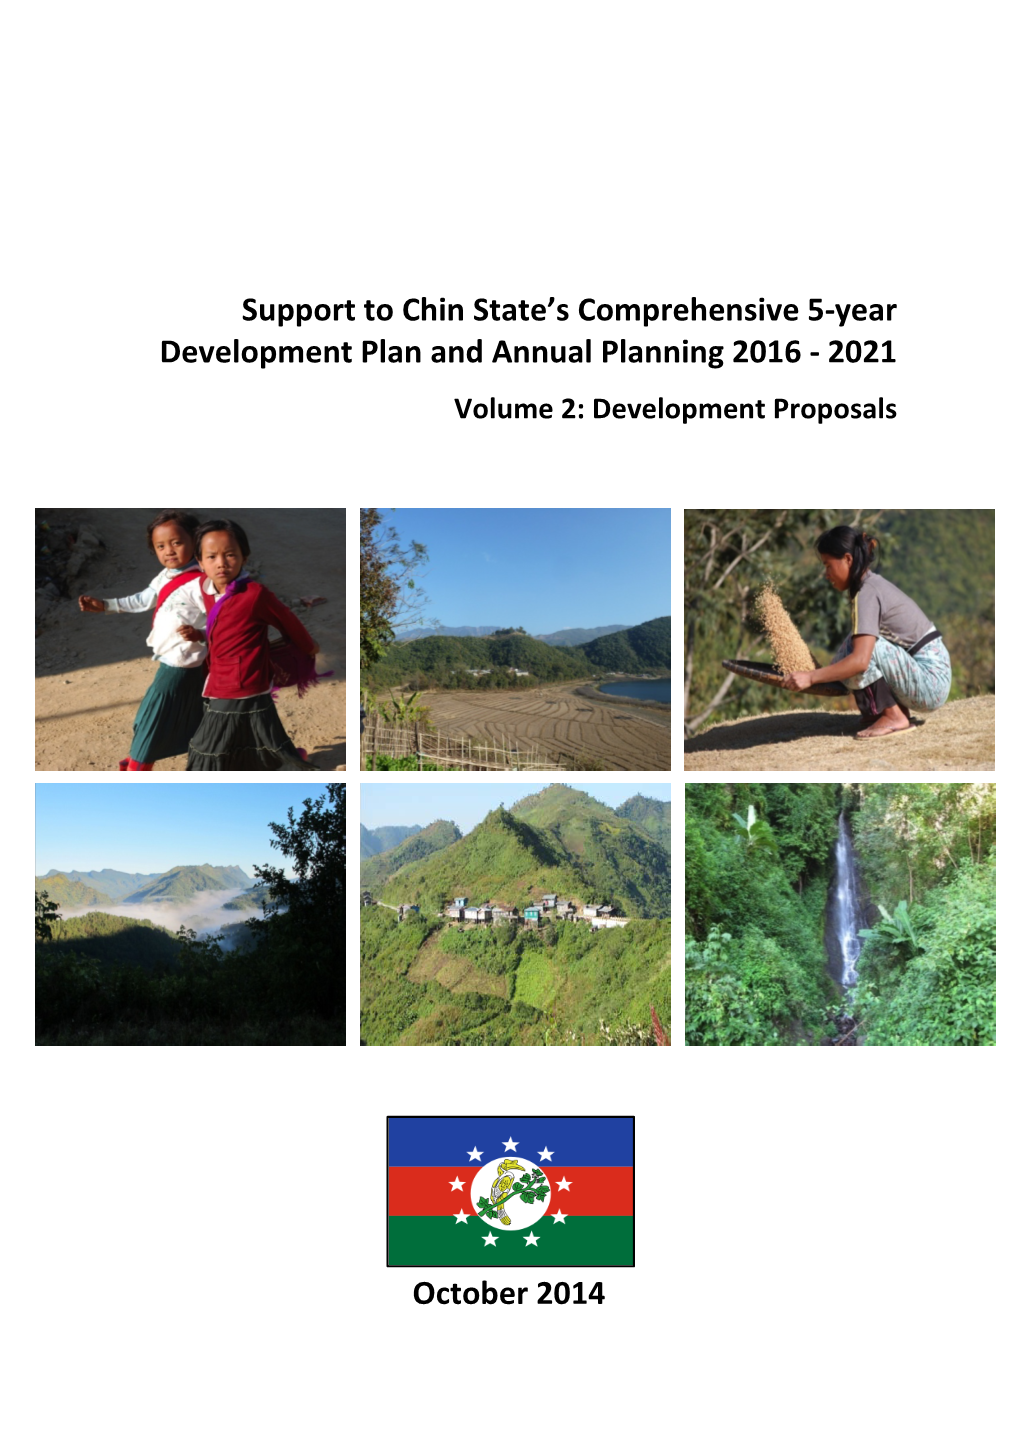 Support to Chin State Comprehensive Development Plan